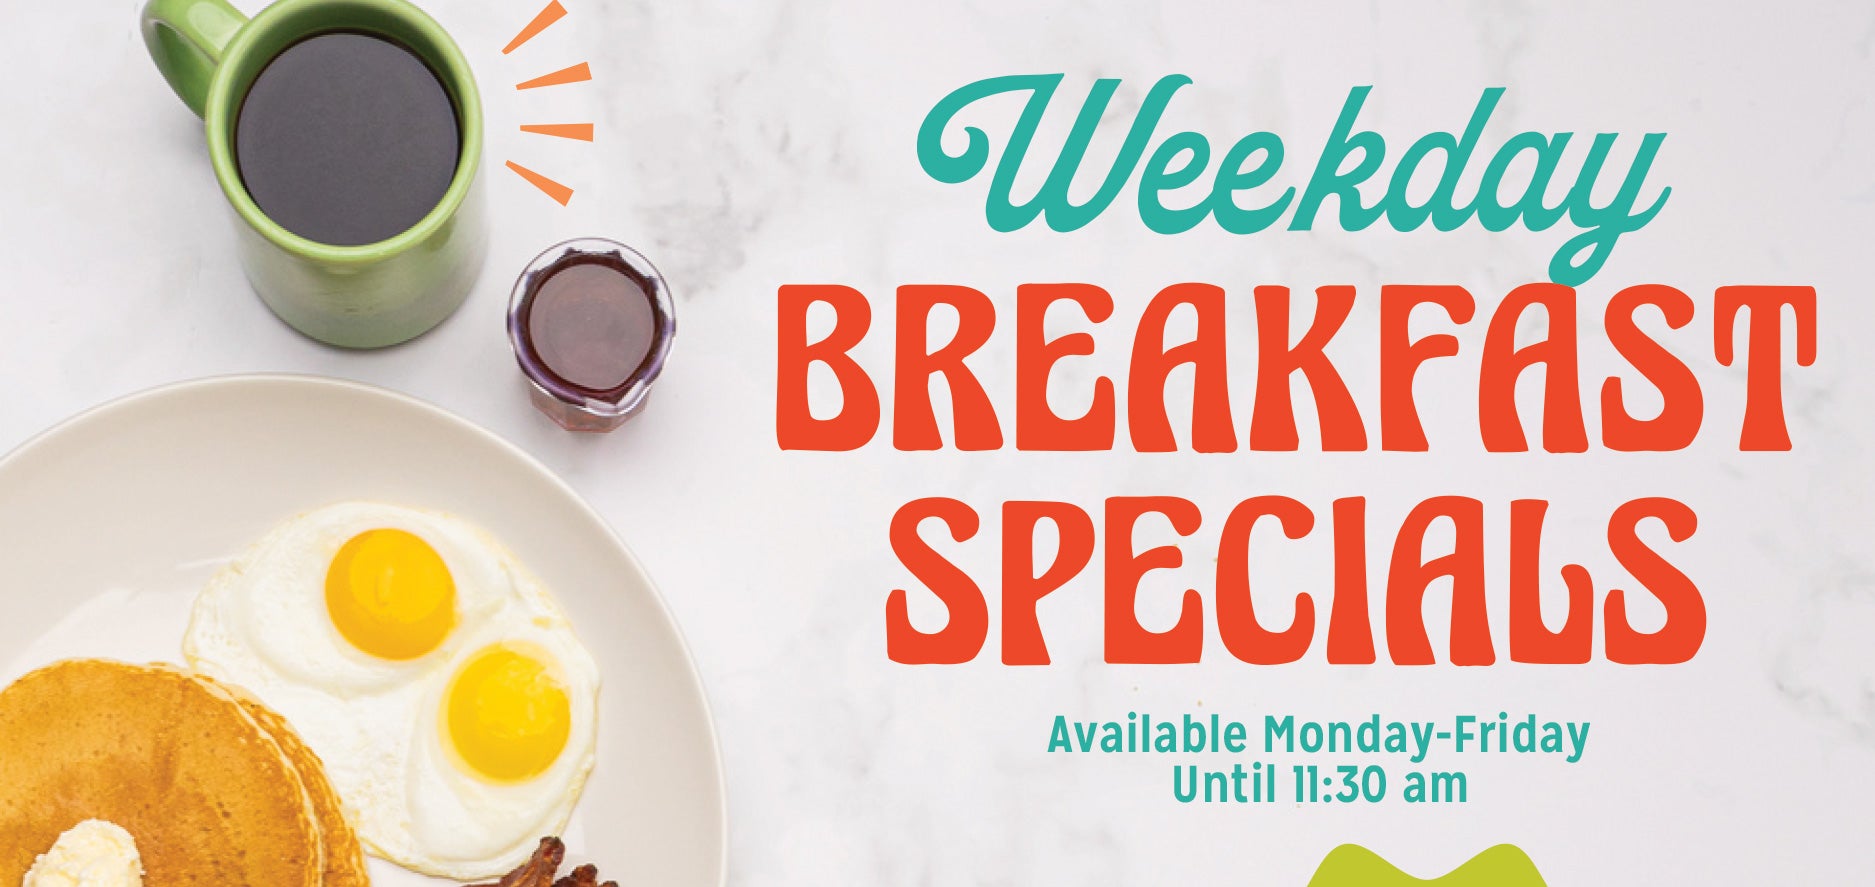 Weekday Breakfast Specials! Available Monday through Friday until 11:30 am